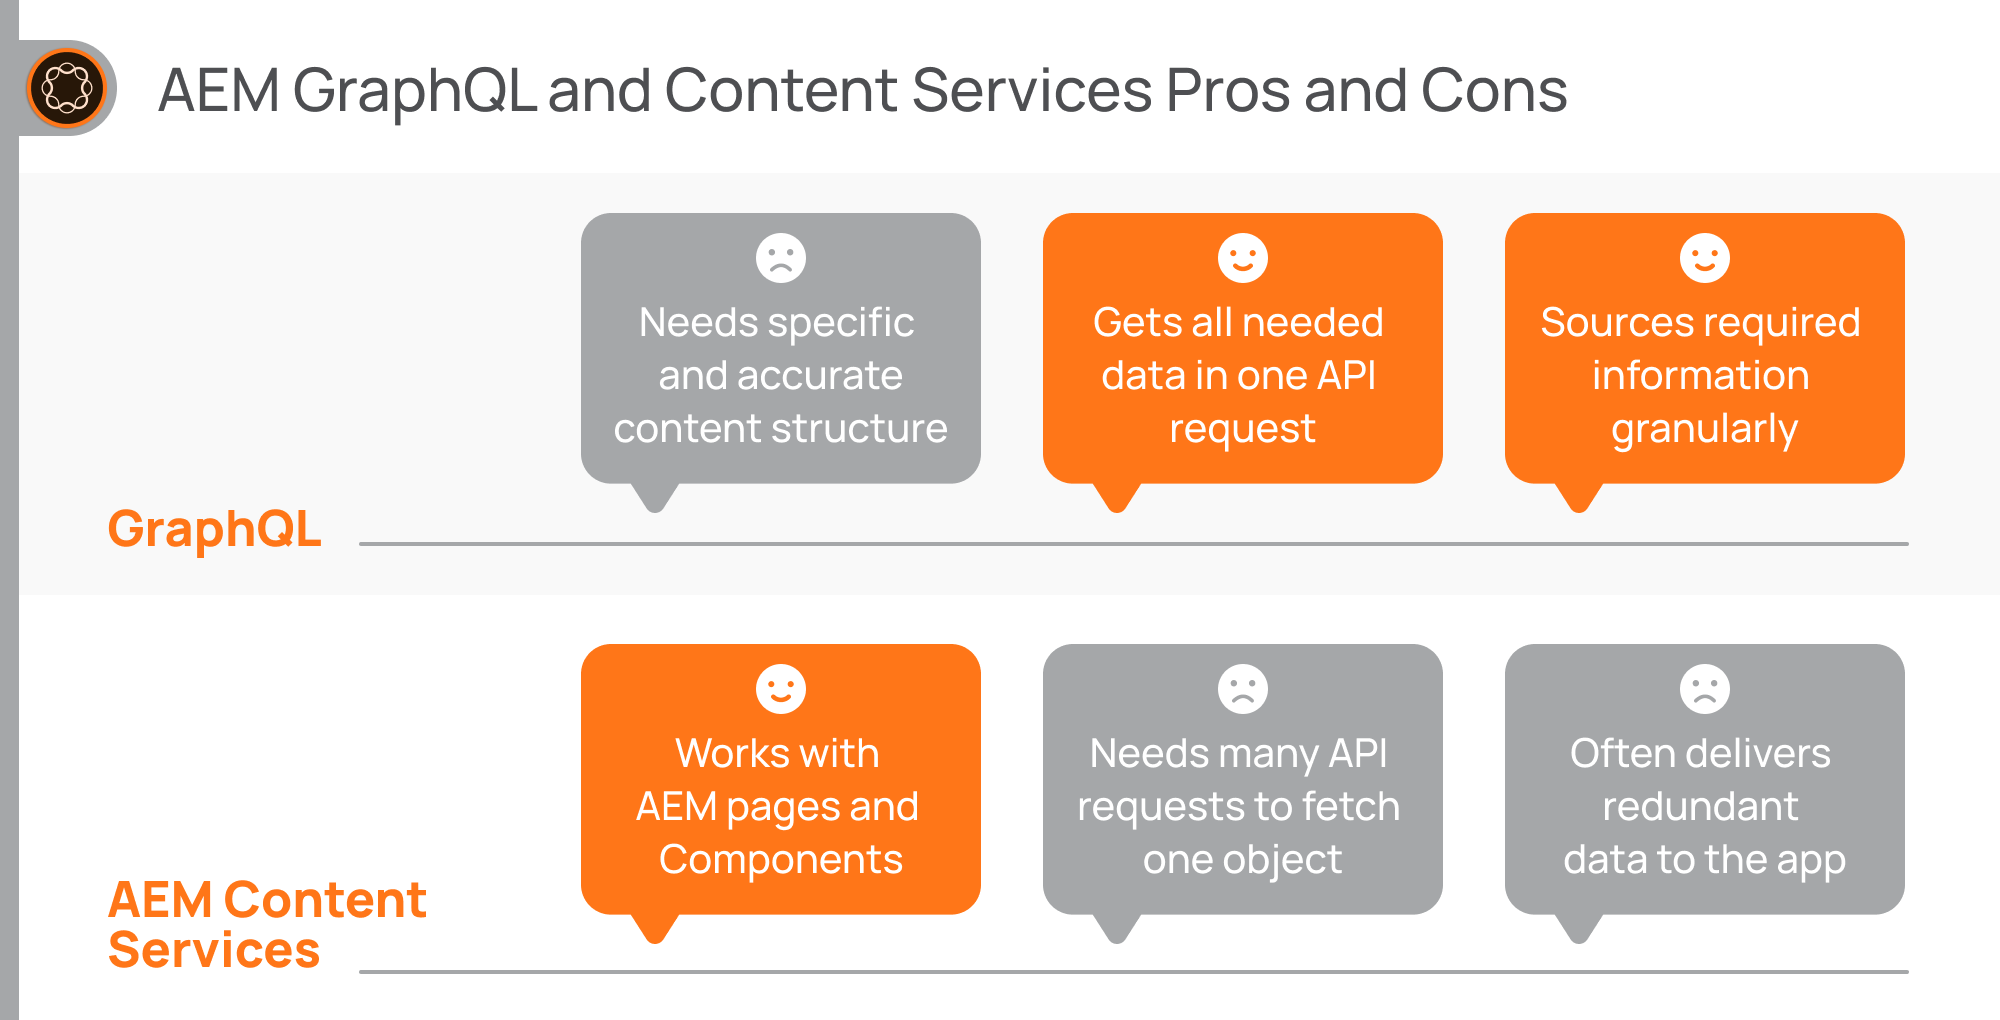 AEM GraphQL and Content Services Pros and Cons